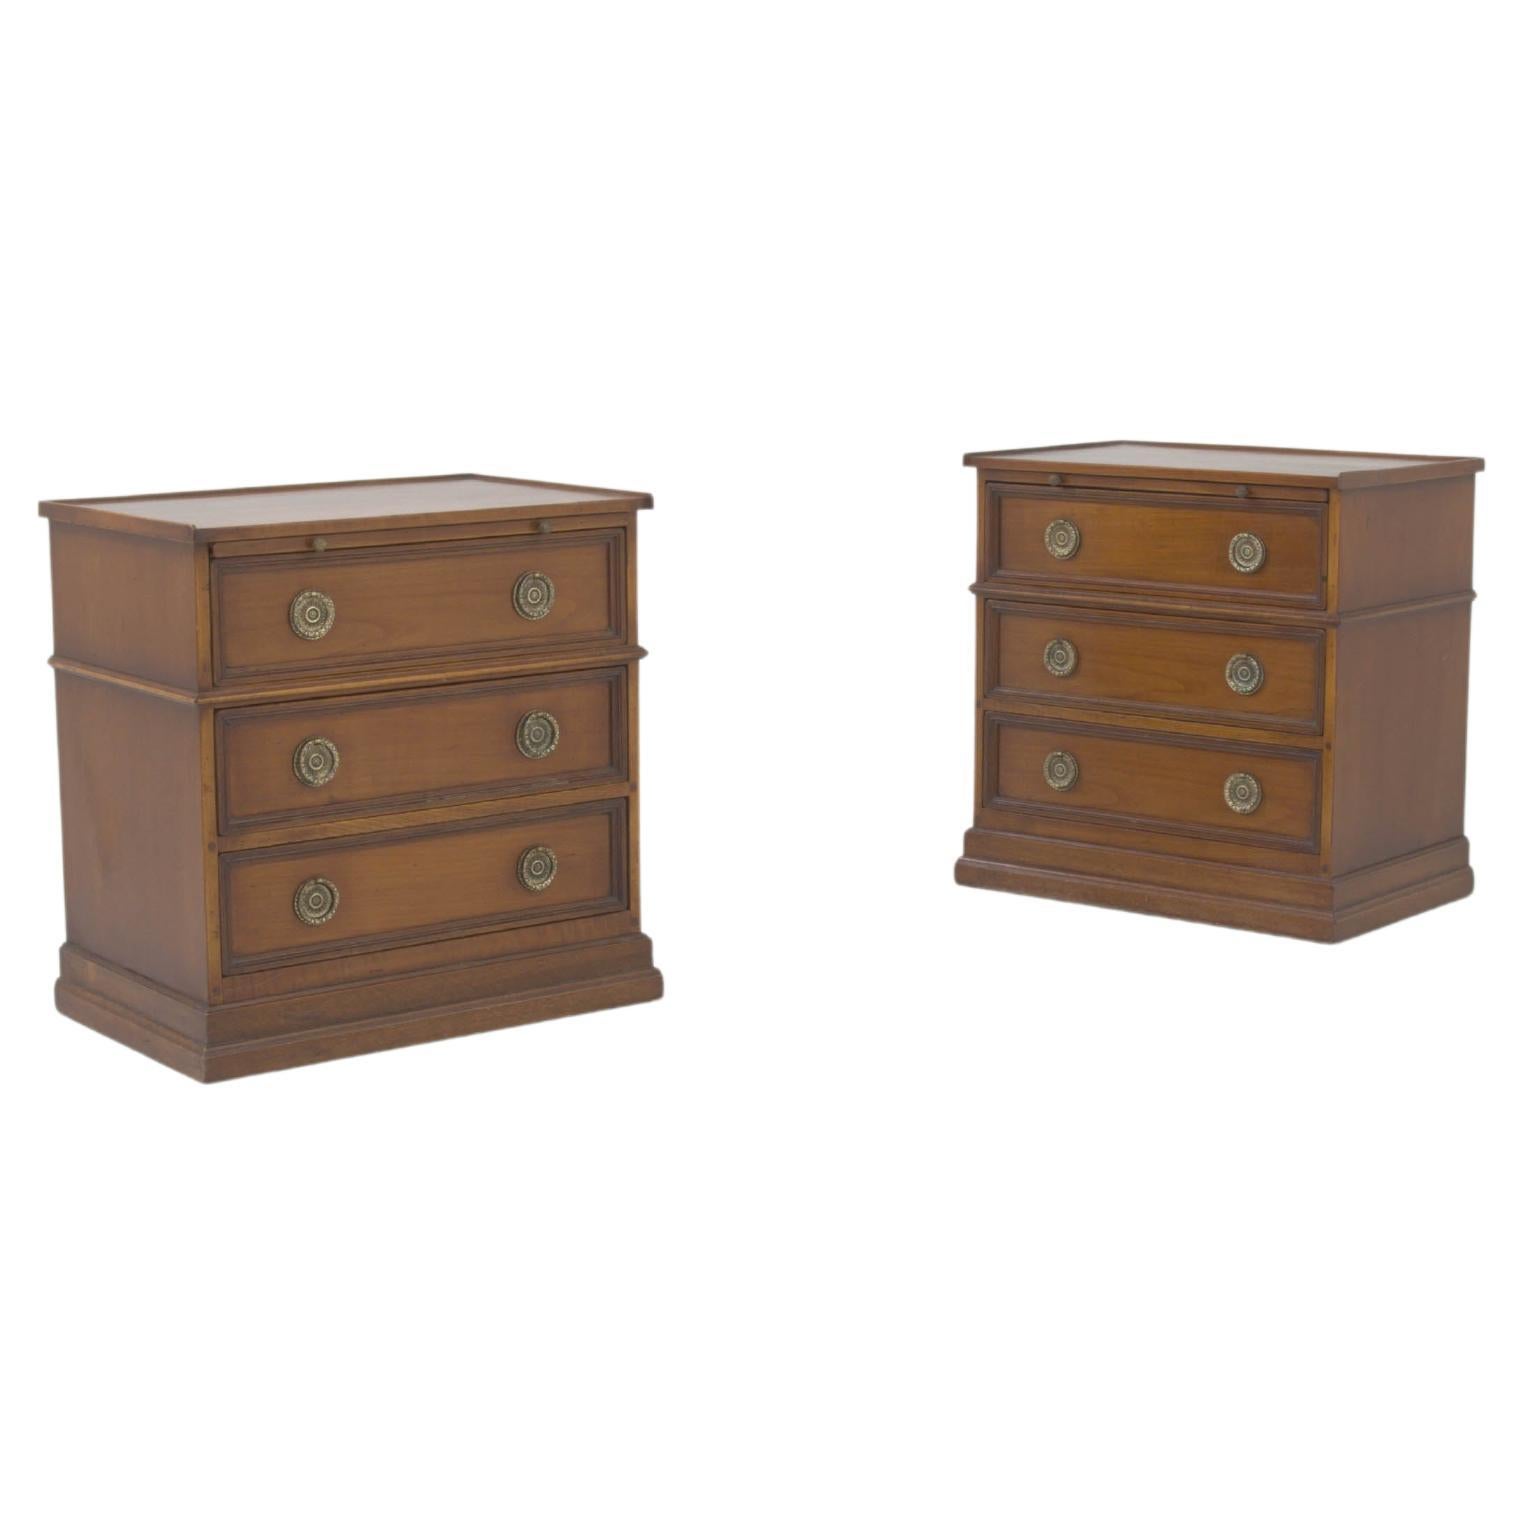 Early 20th Century British Wooden Bedsides With Original Patina, a Pair